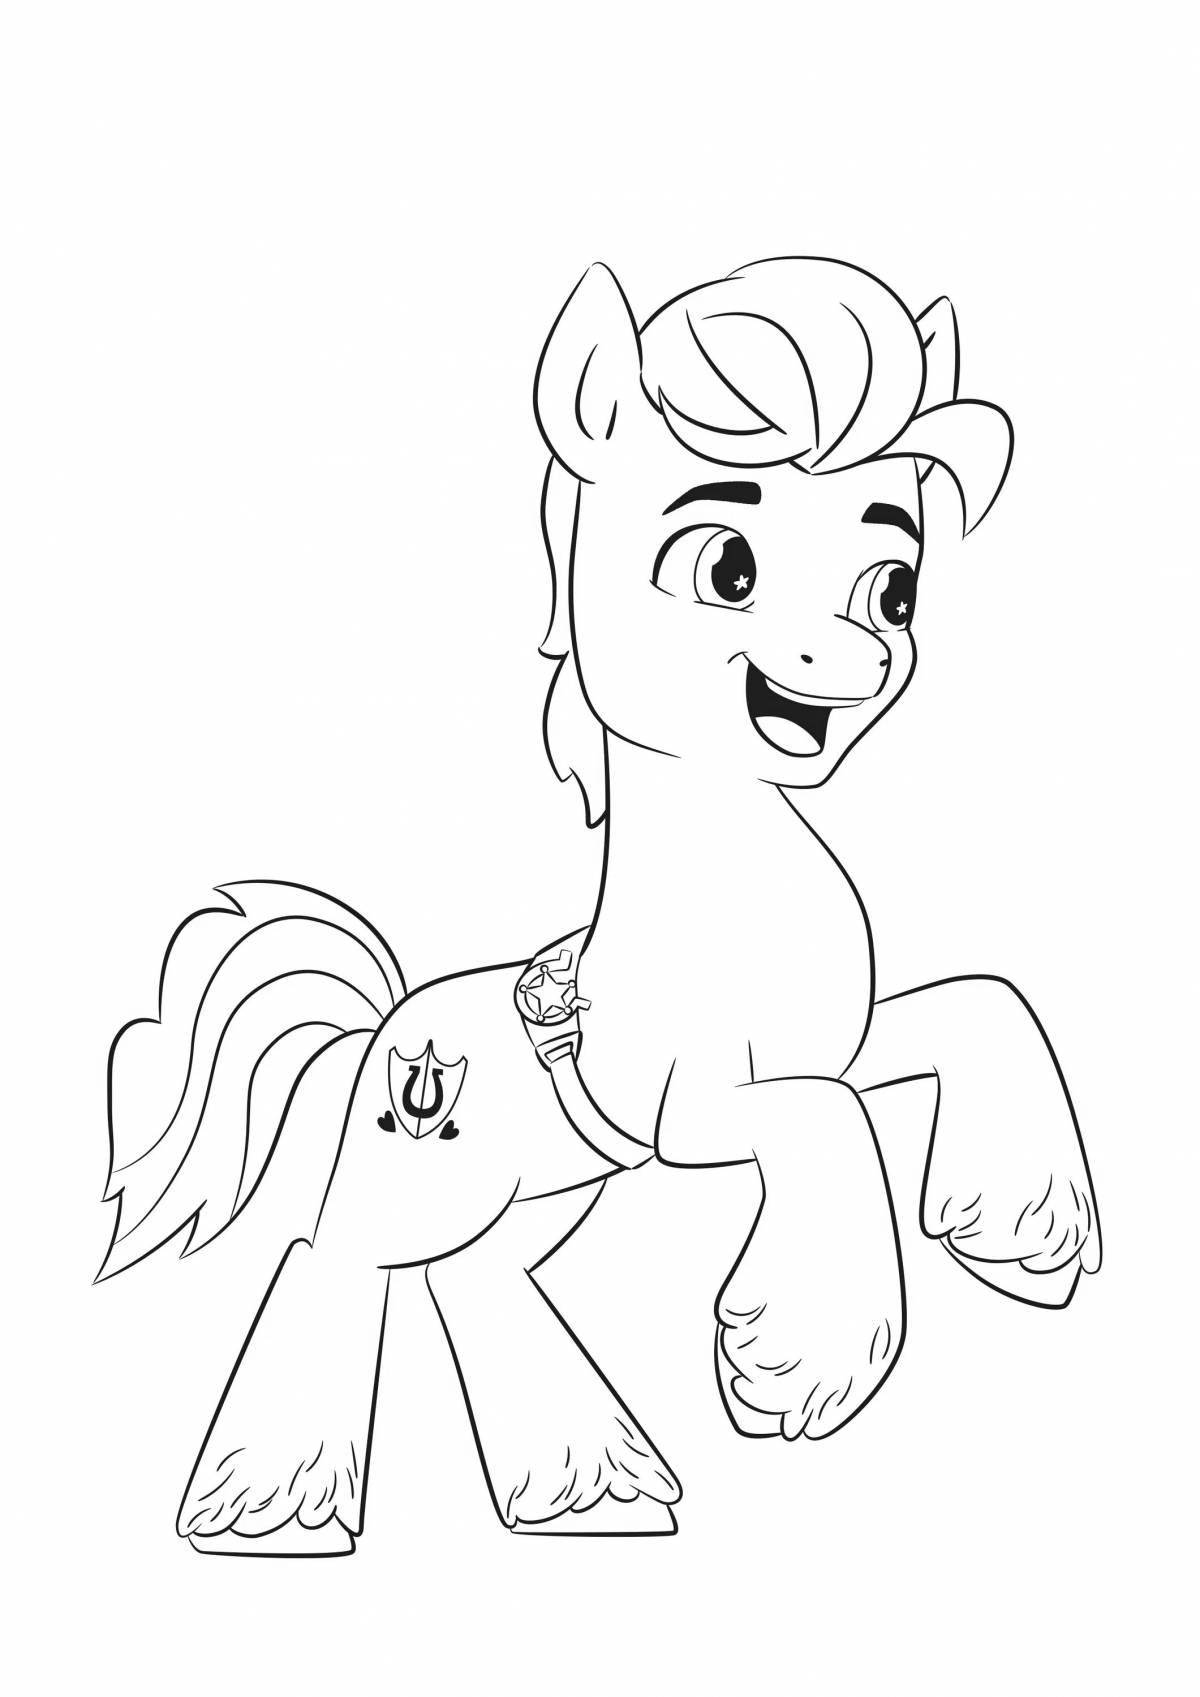 Amazing little pony next generation coloring book